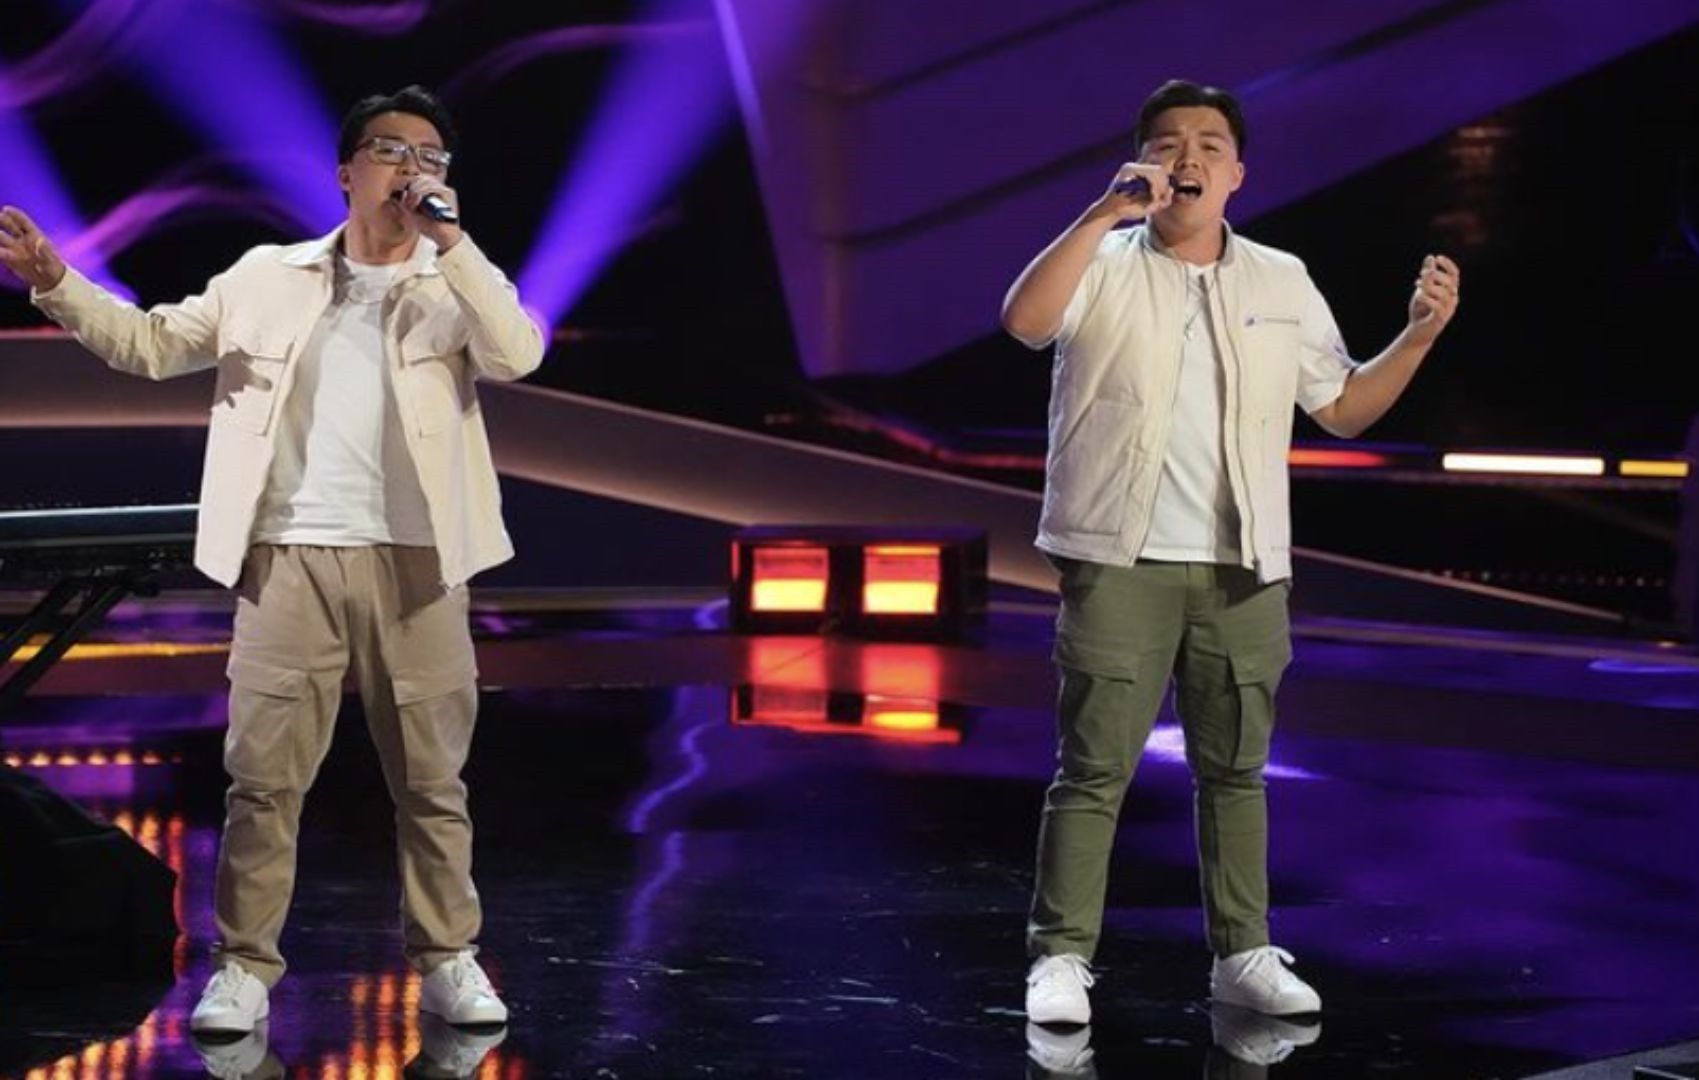 Fil-Am twins amaze on 'The Voice' with One Direction cover